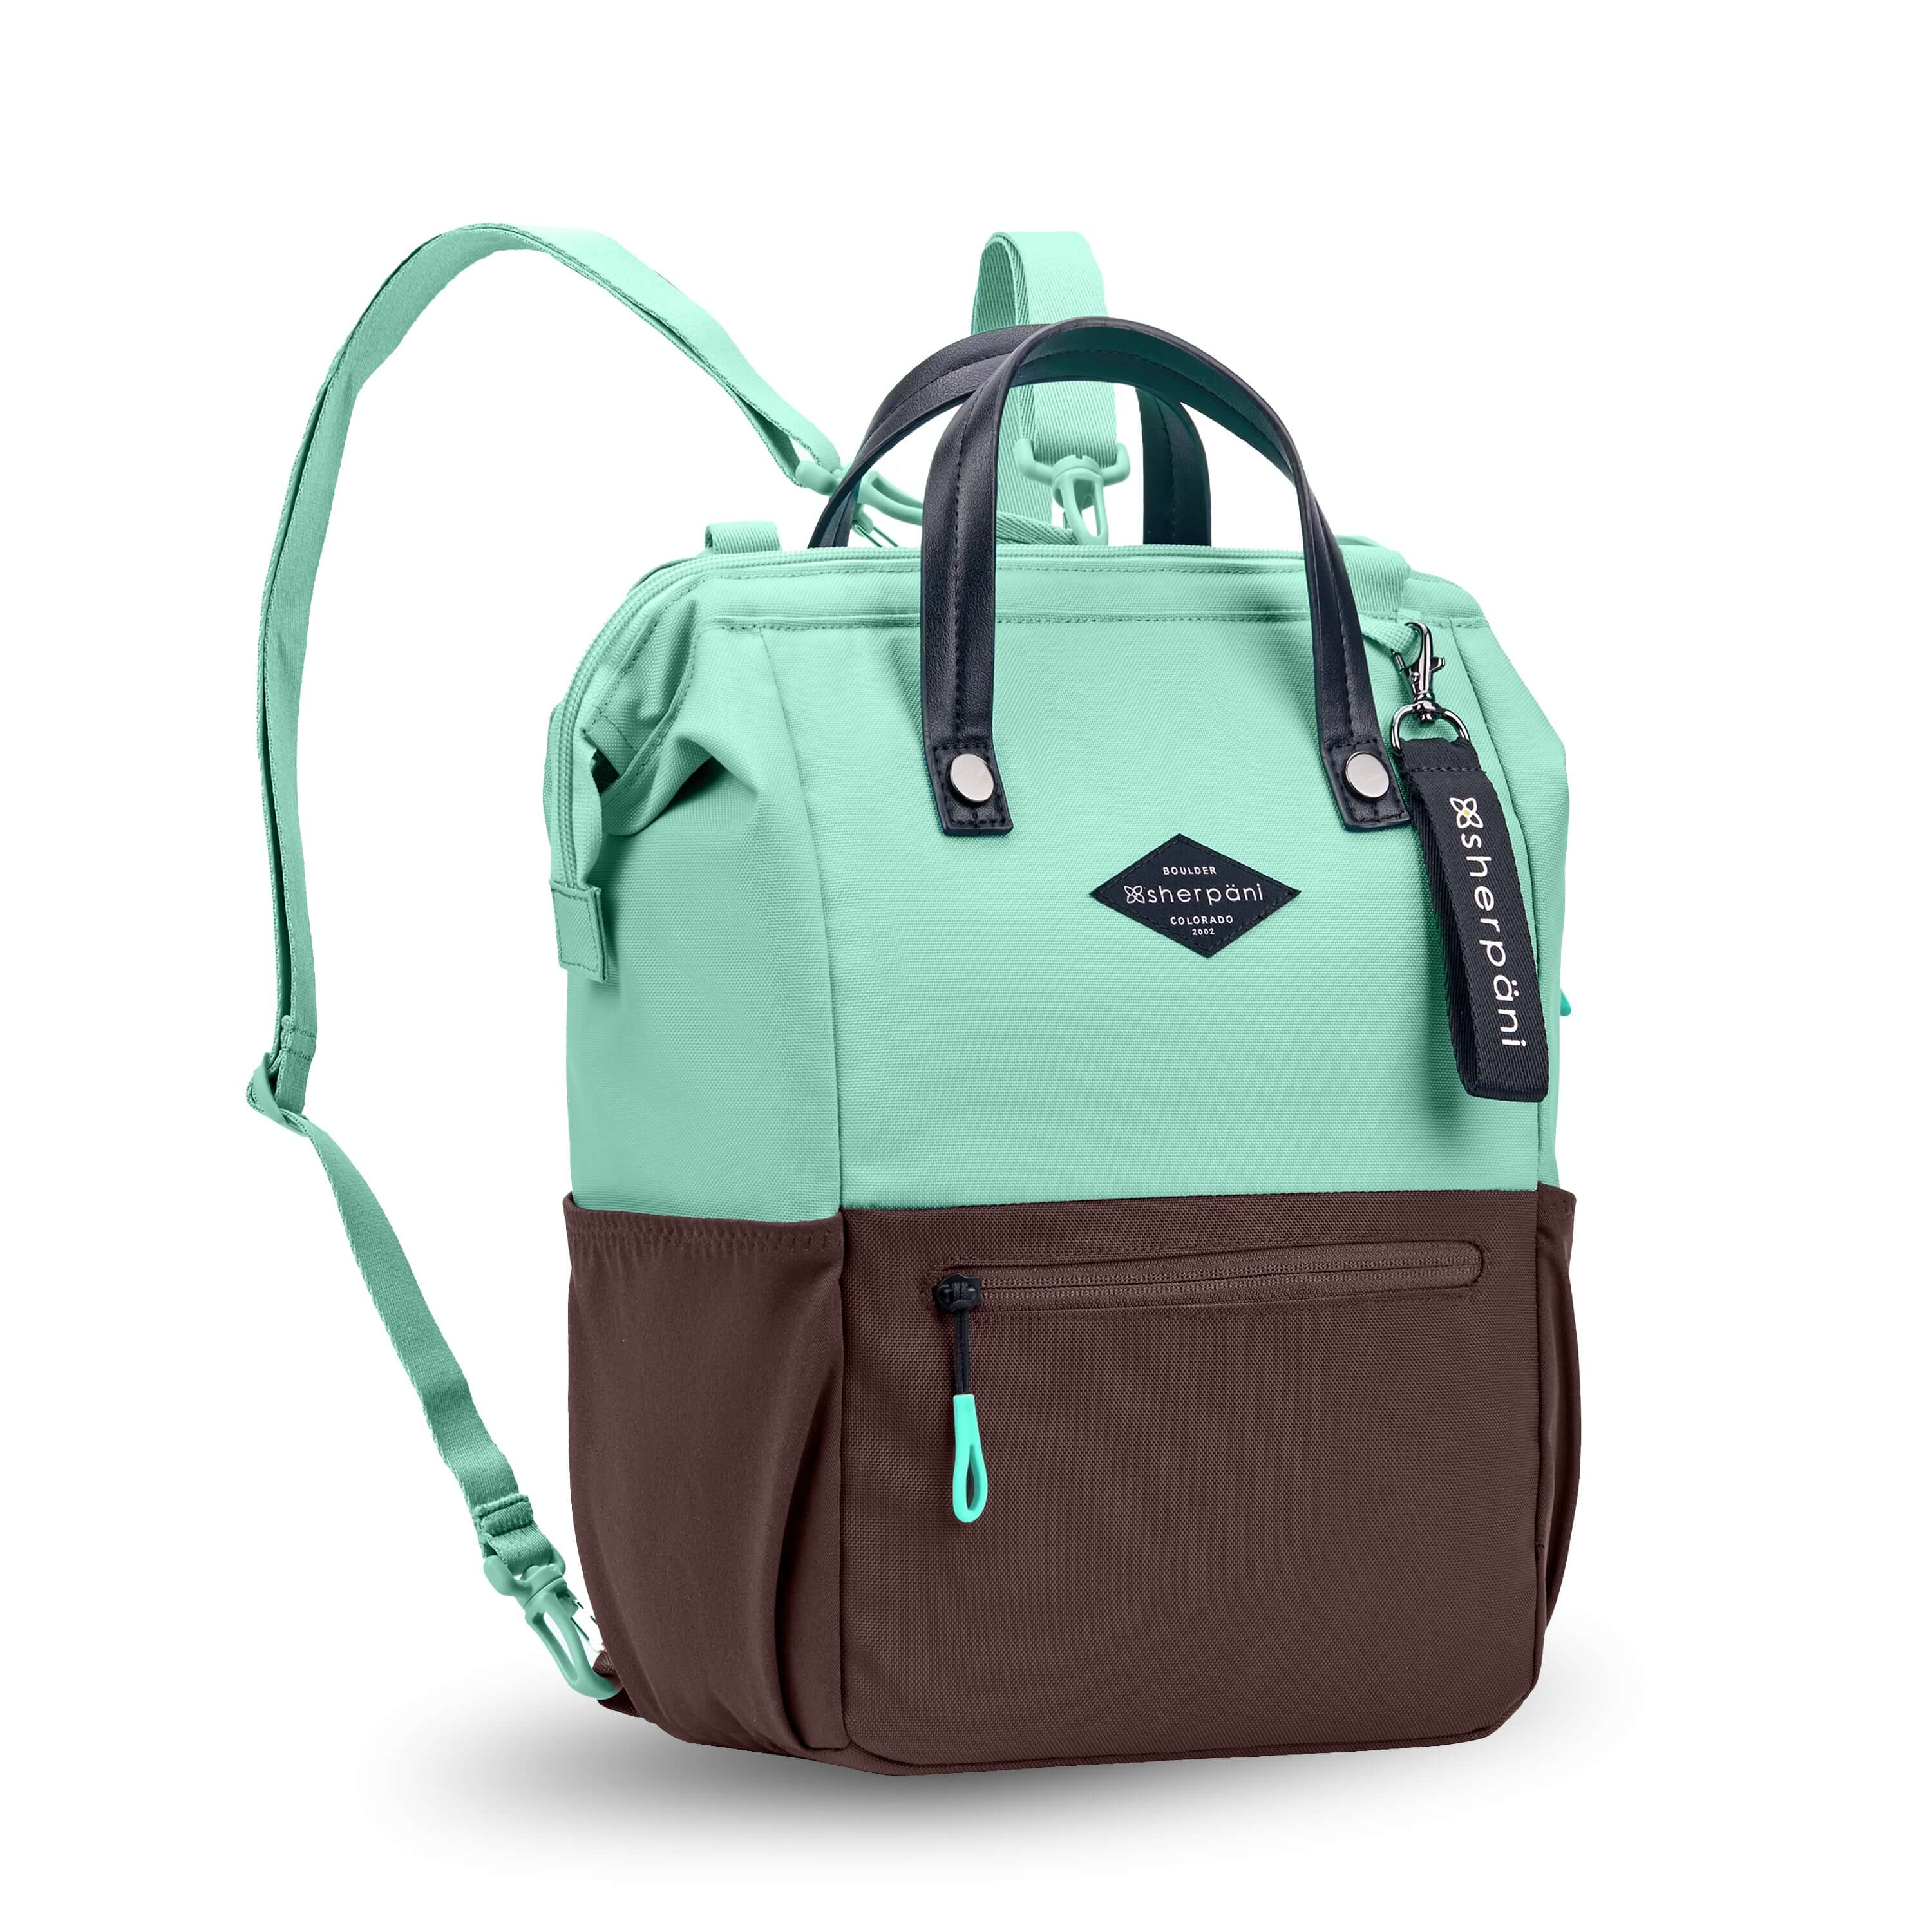 Angled front view of Sherpani three-in-one bag, the Dispatch in Seagreen. The bag is two-toned: the top is light green and the bottom is brown. There is an external zipper pocket on the front panel. Easy-pull zippers are accented in light green. A branded Sherpani keychain is clipped to the upper right corner. Elastic water bottle holders sit on either side of the bag. It has short tote handles and adjustable/detachable straps that can function for a backpack or crossbody.